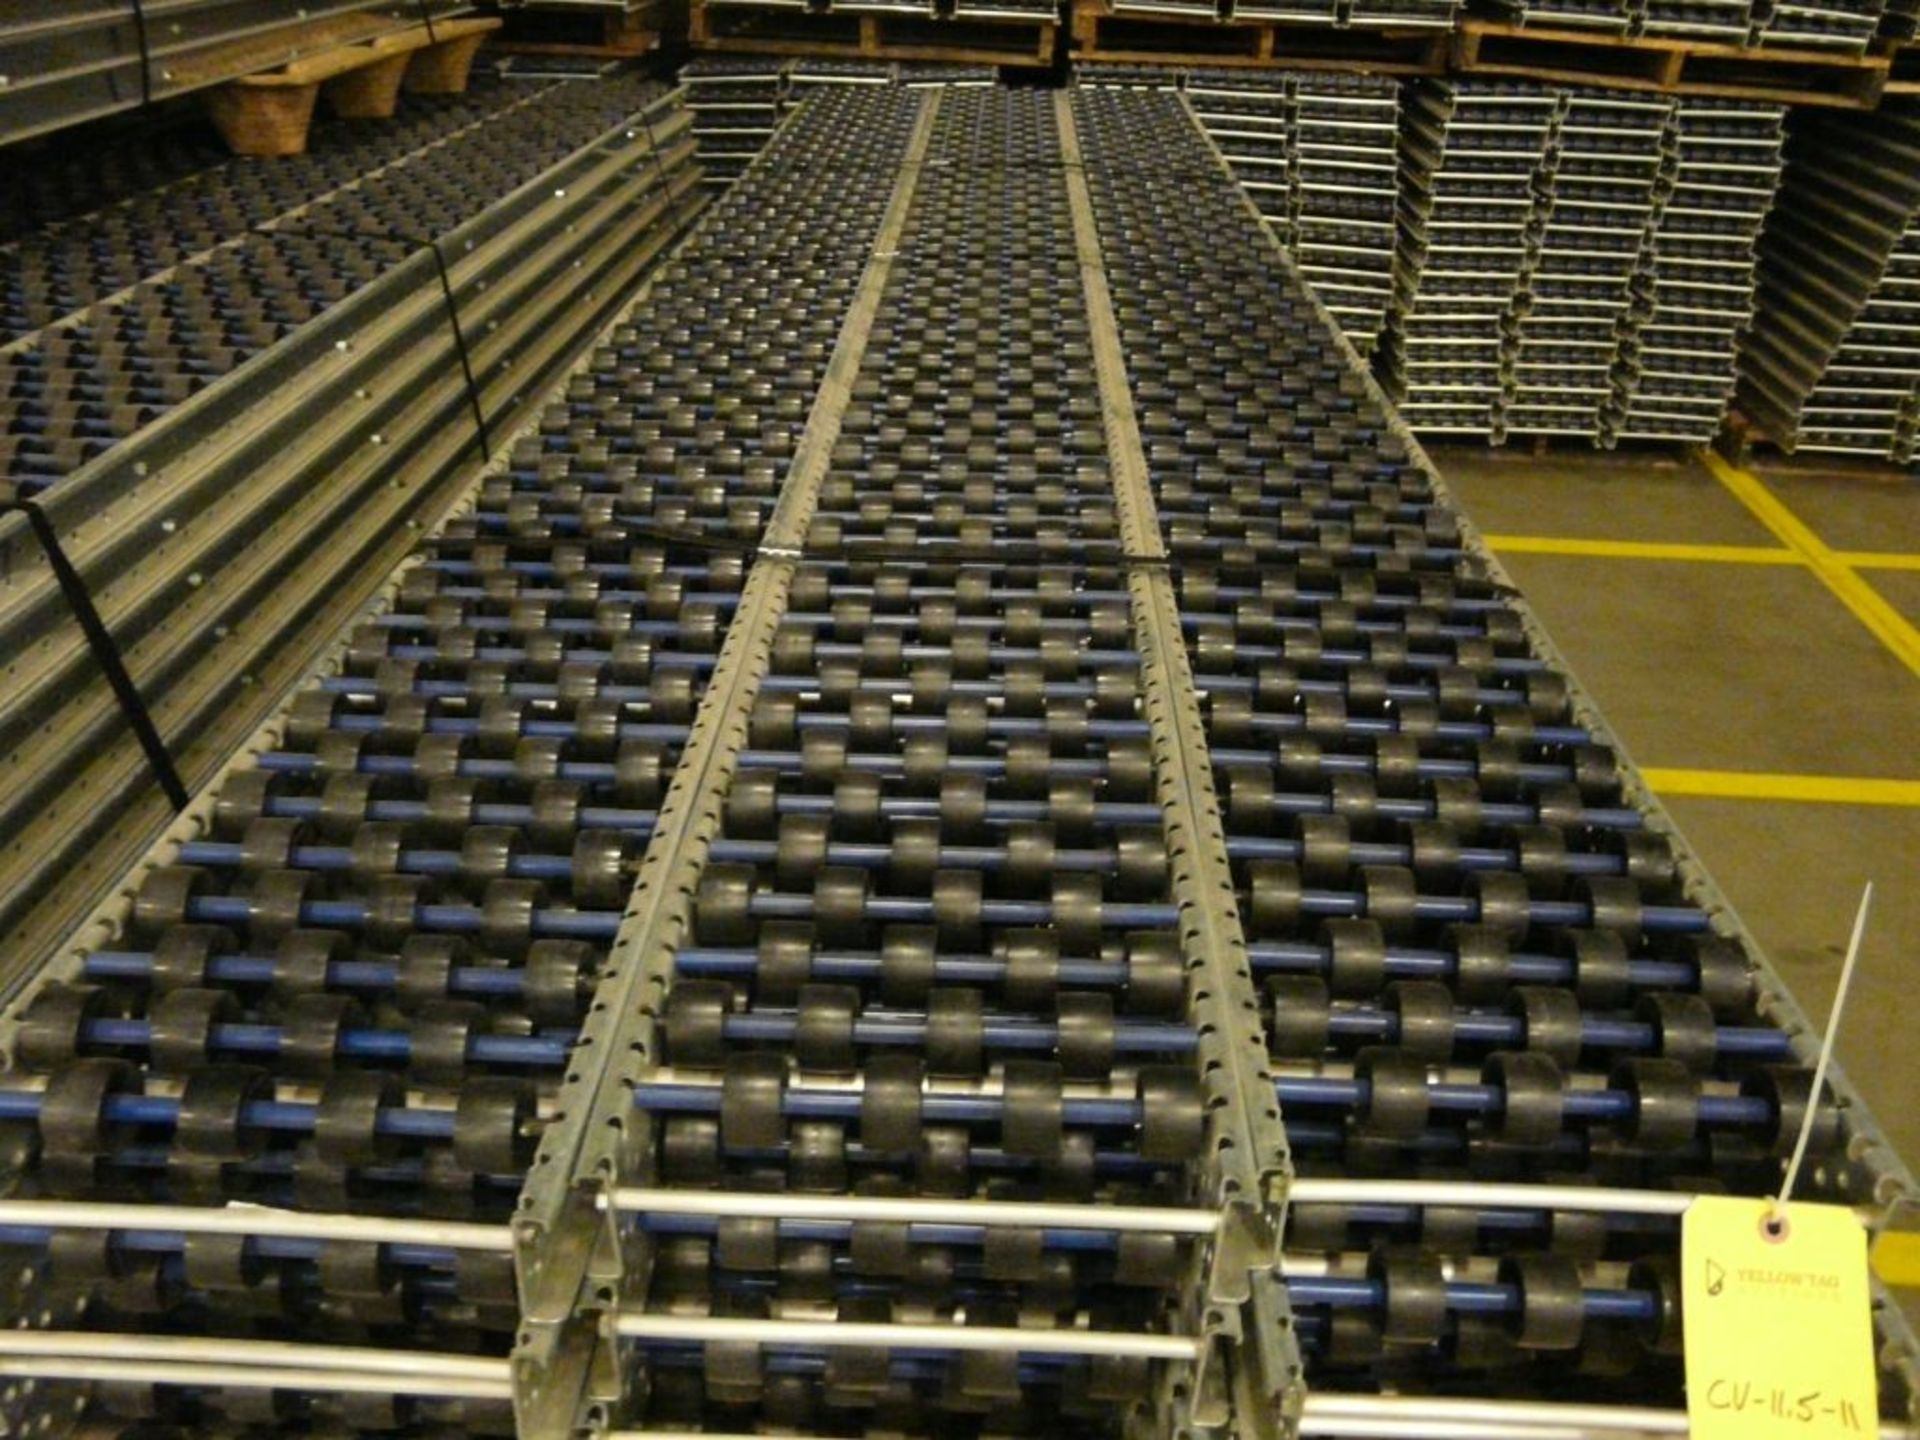 Lot of (90) SpanTrack Wheelbed Carton Flow Conveyors - 11.5'L x 11"W; Tag: 223604 - $30 Lot - Image 3 of 4